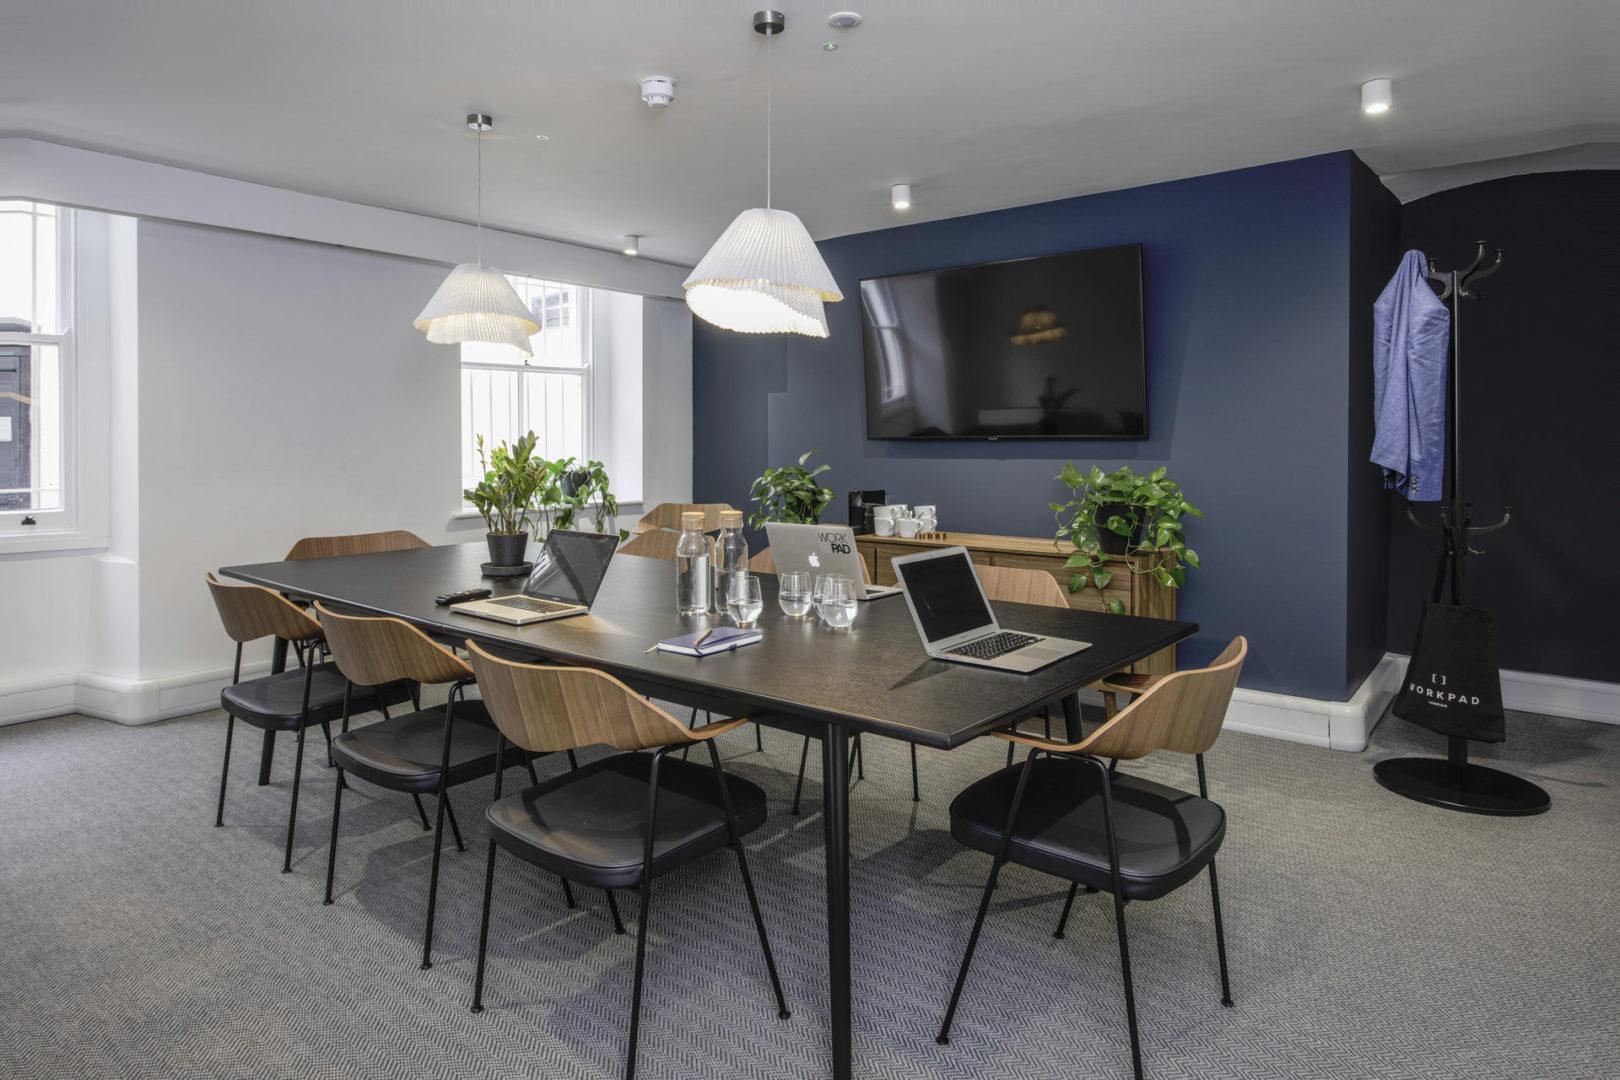 Office for 12 pers. in WorkPad, 3 BLOOMSBURY PLACE